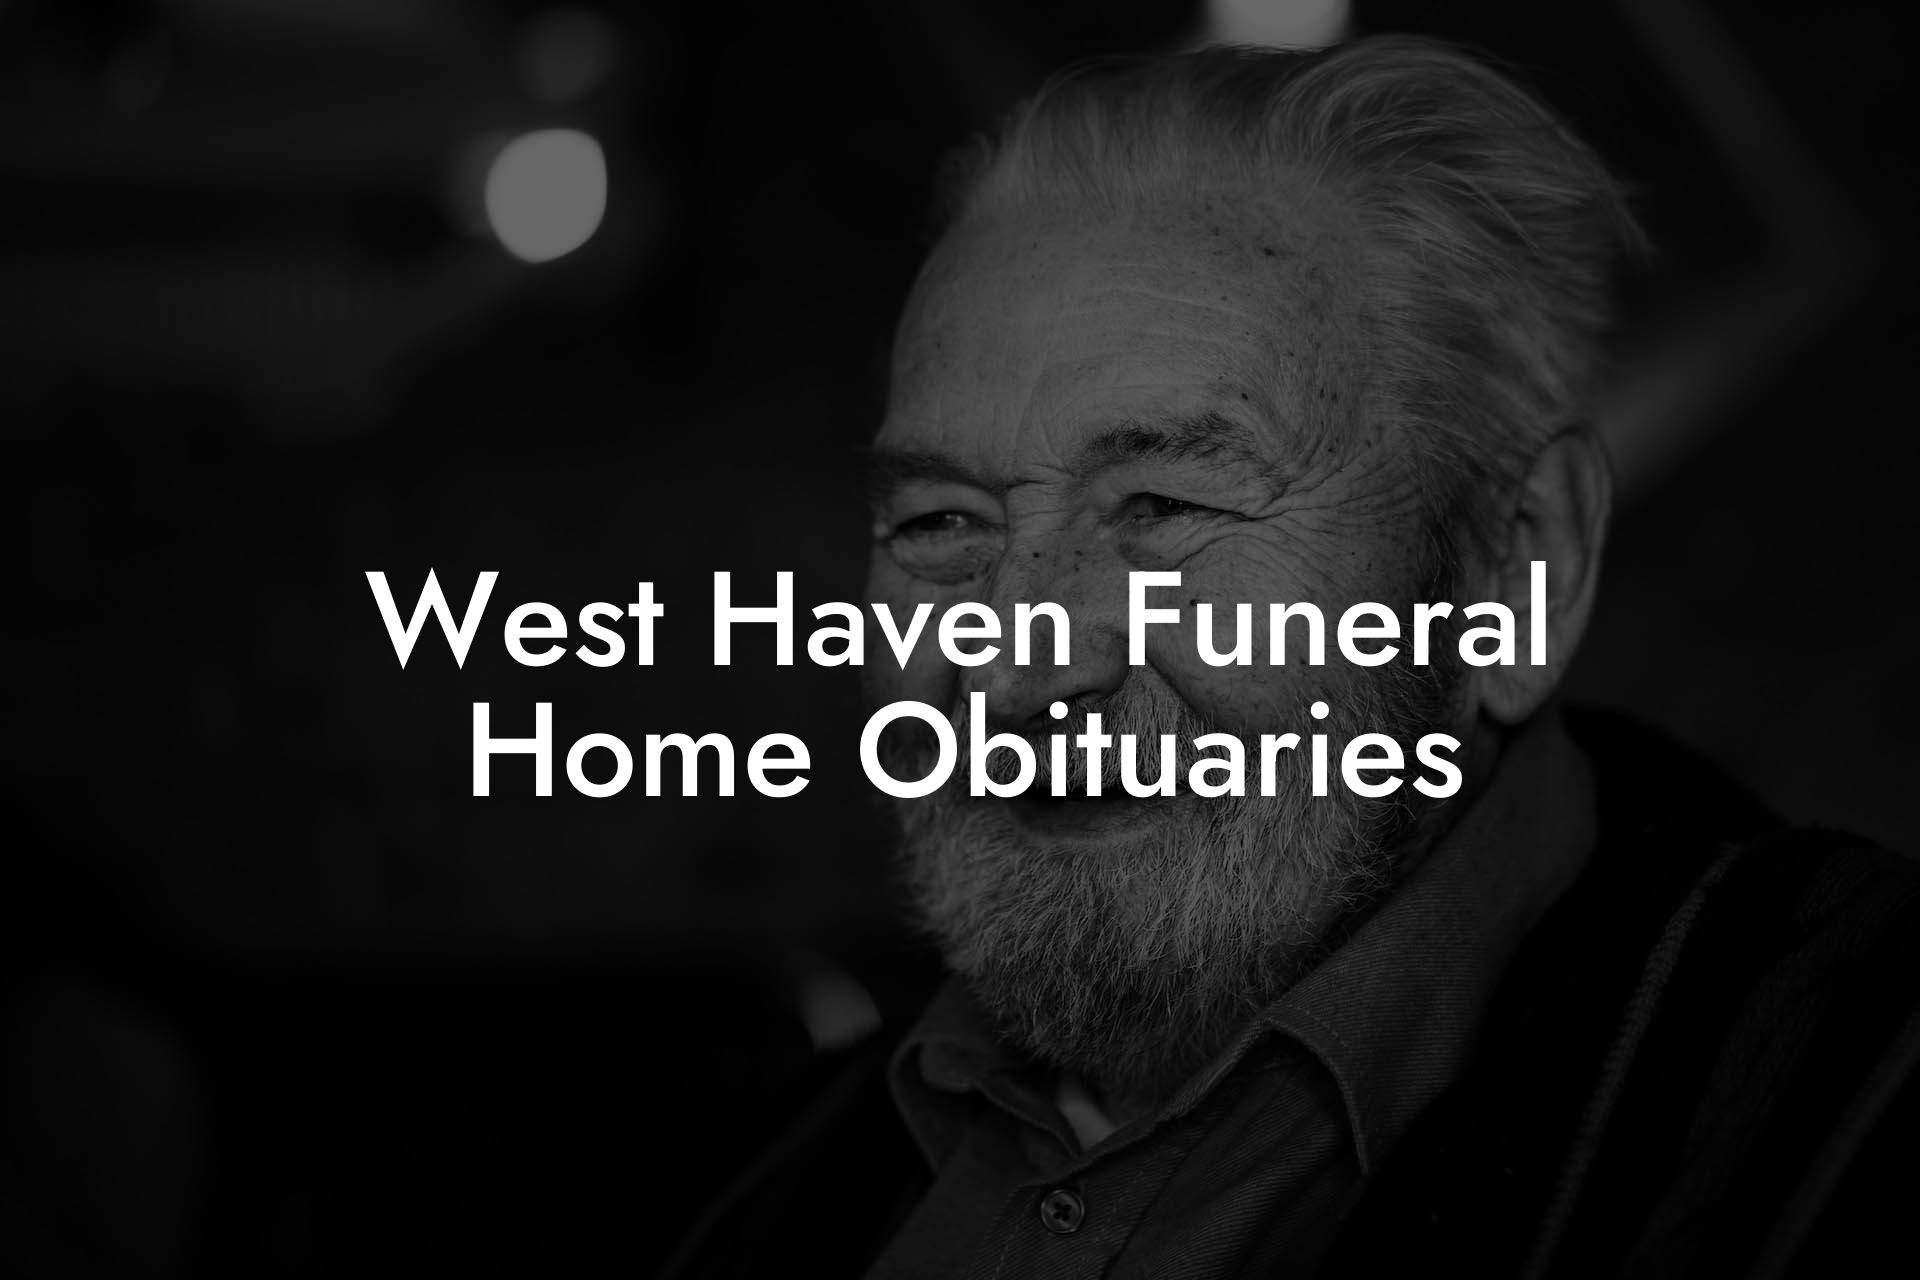 West Haven Funeral Home Obituaries